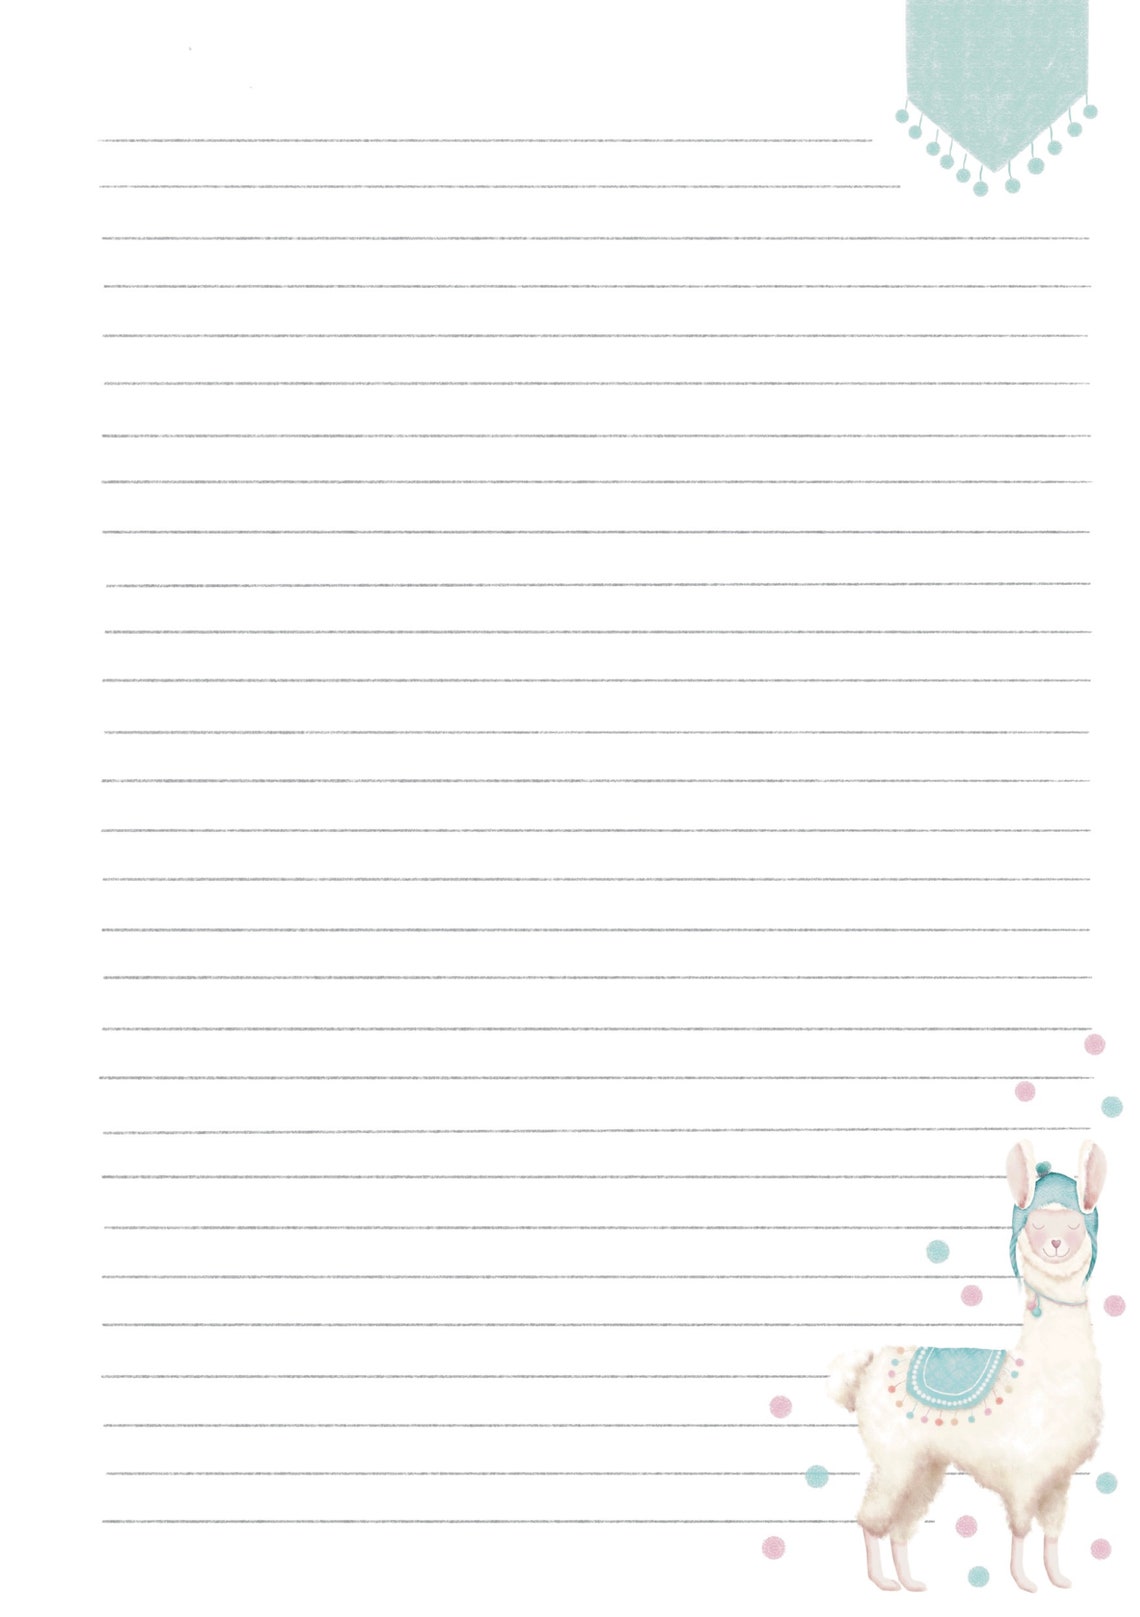 a5-lined-paper-templates-at-allbusinesstemplatescom-a5-lined-paper-a5-lined-paper-notebook